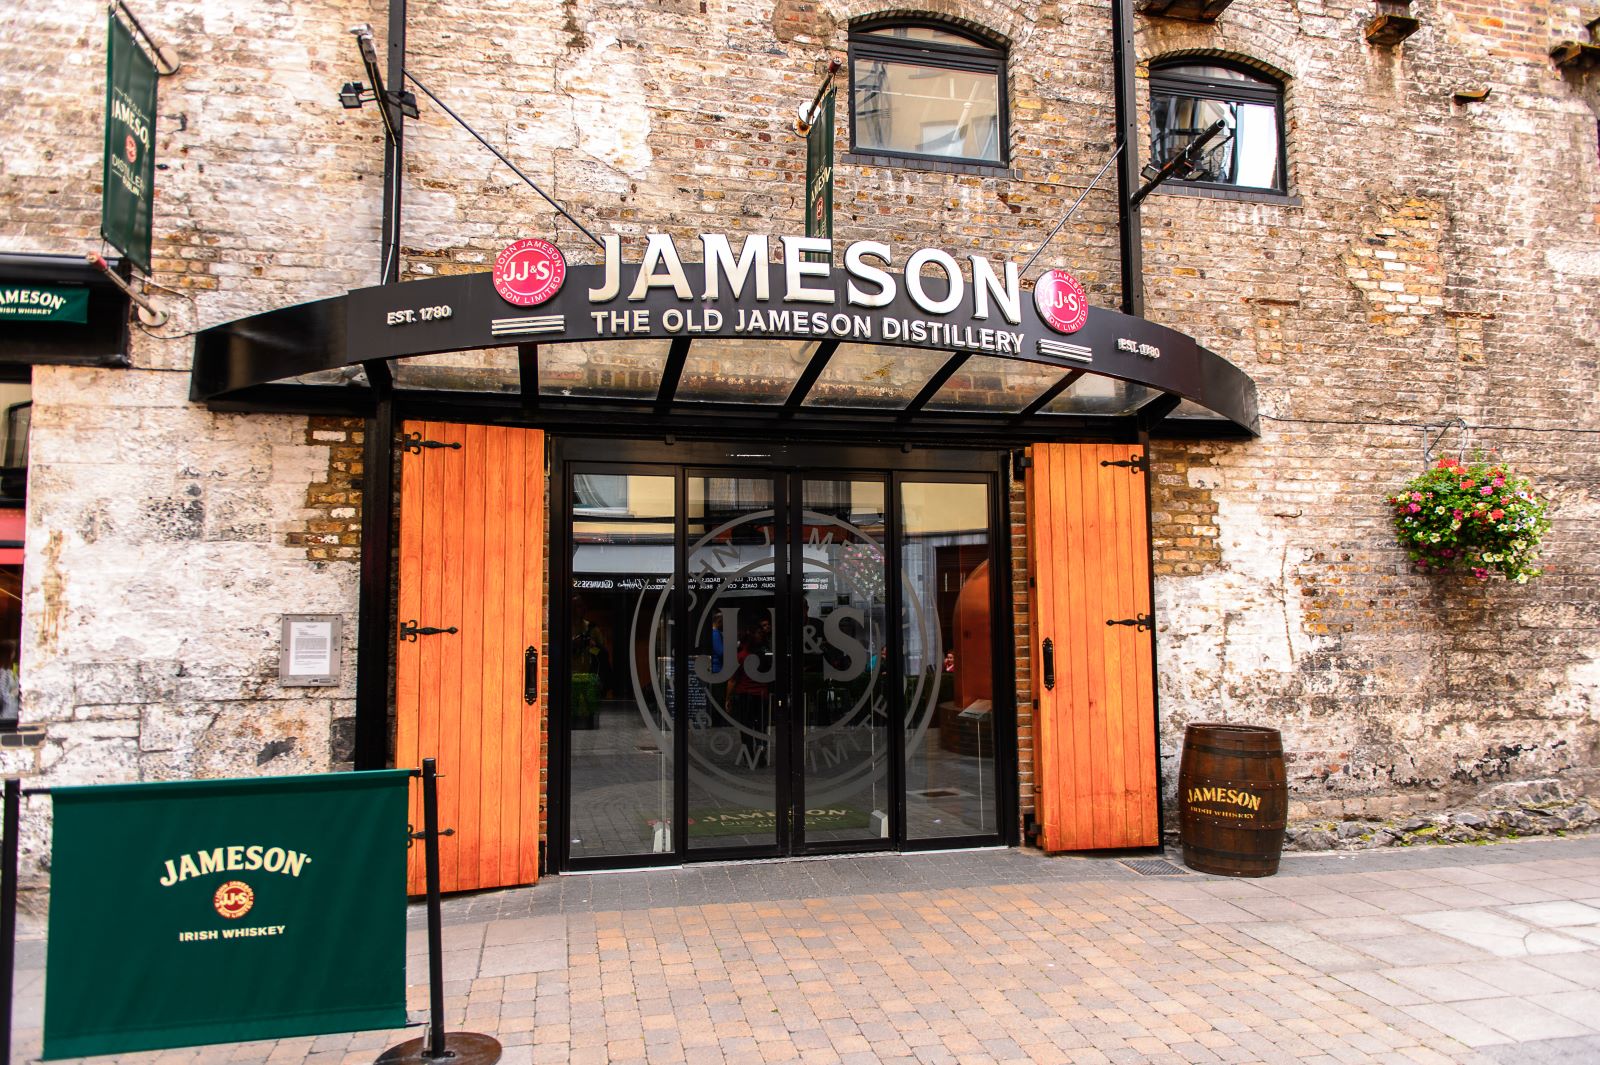 <p class="wp-caption-text">Image credit: Shutterstock / Anton_Ivanov</p>  <p>Visit the Jameson Distillery on Bow Street. Opt for a guided tour or a premium whiskey tasting to learn about the art of Irish whiskey making.</p>